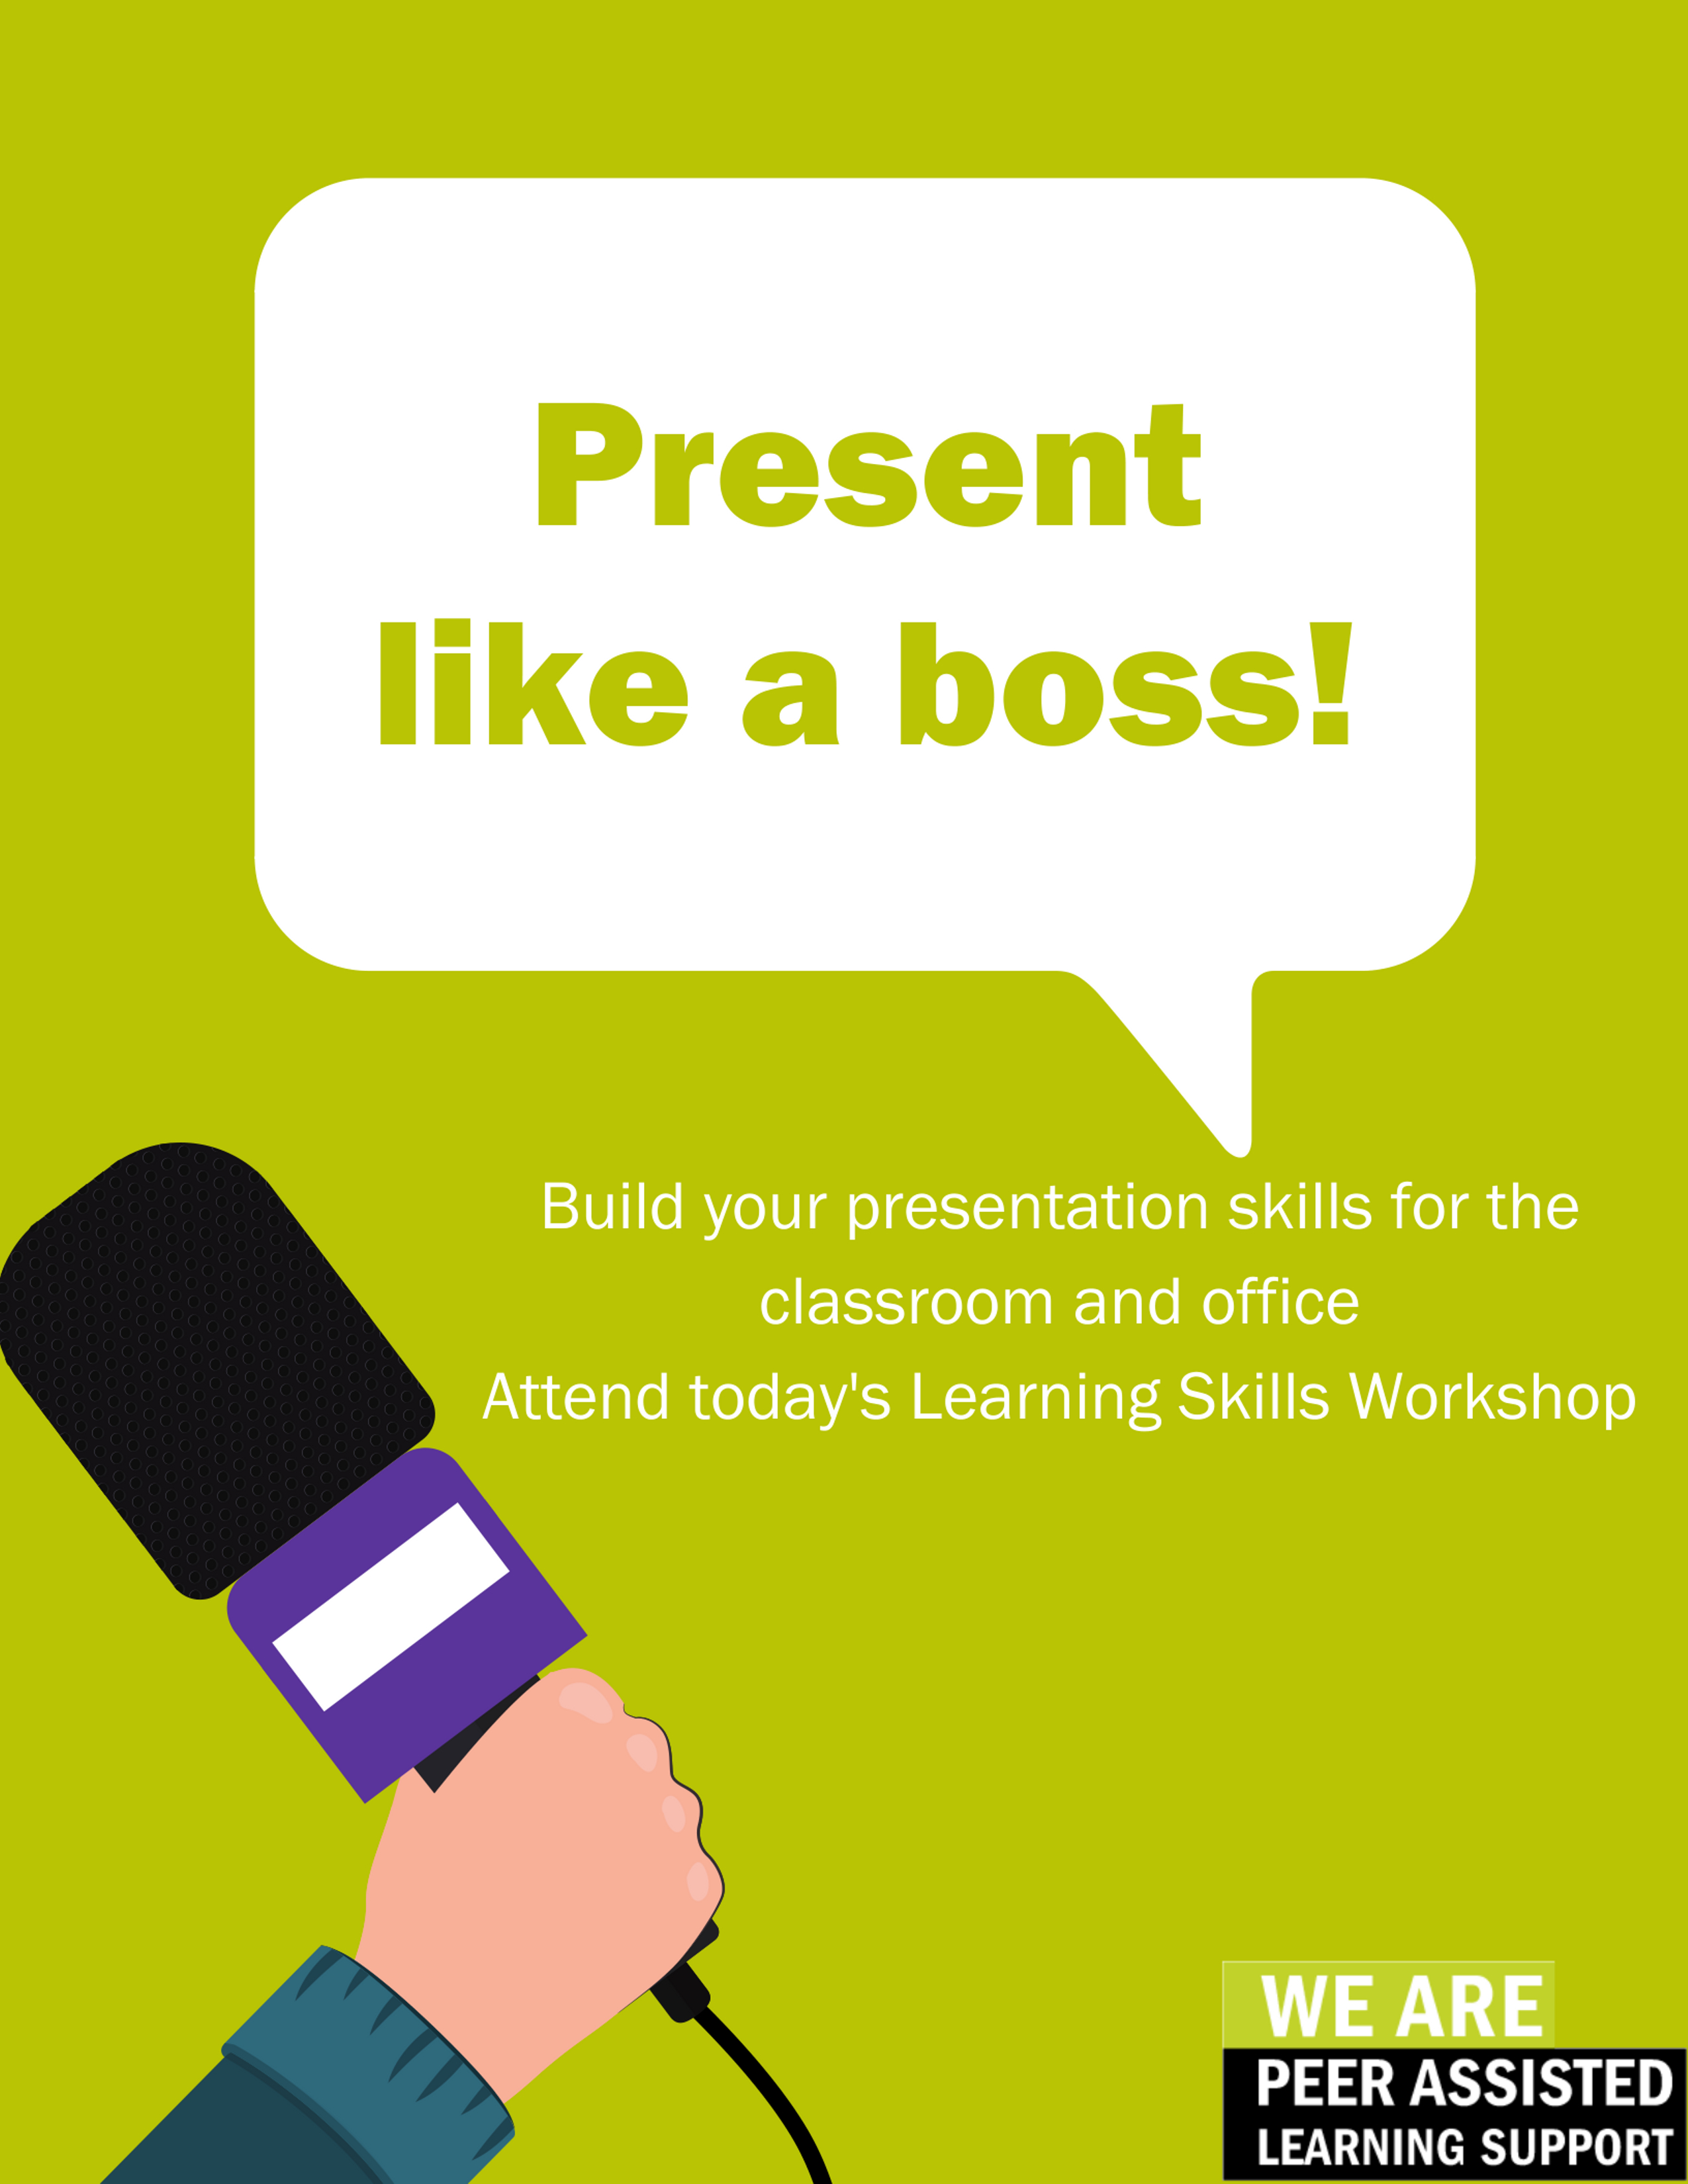 Cartoon image of hand holding a microphone with the text "Present like a boss!"